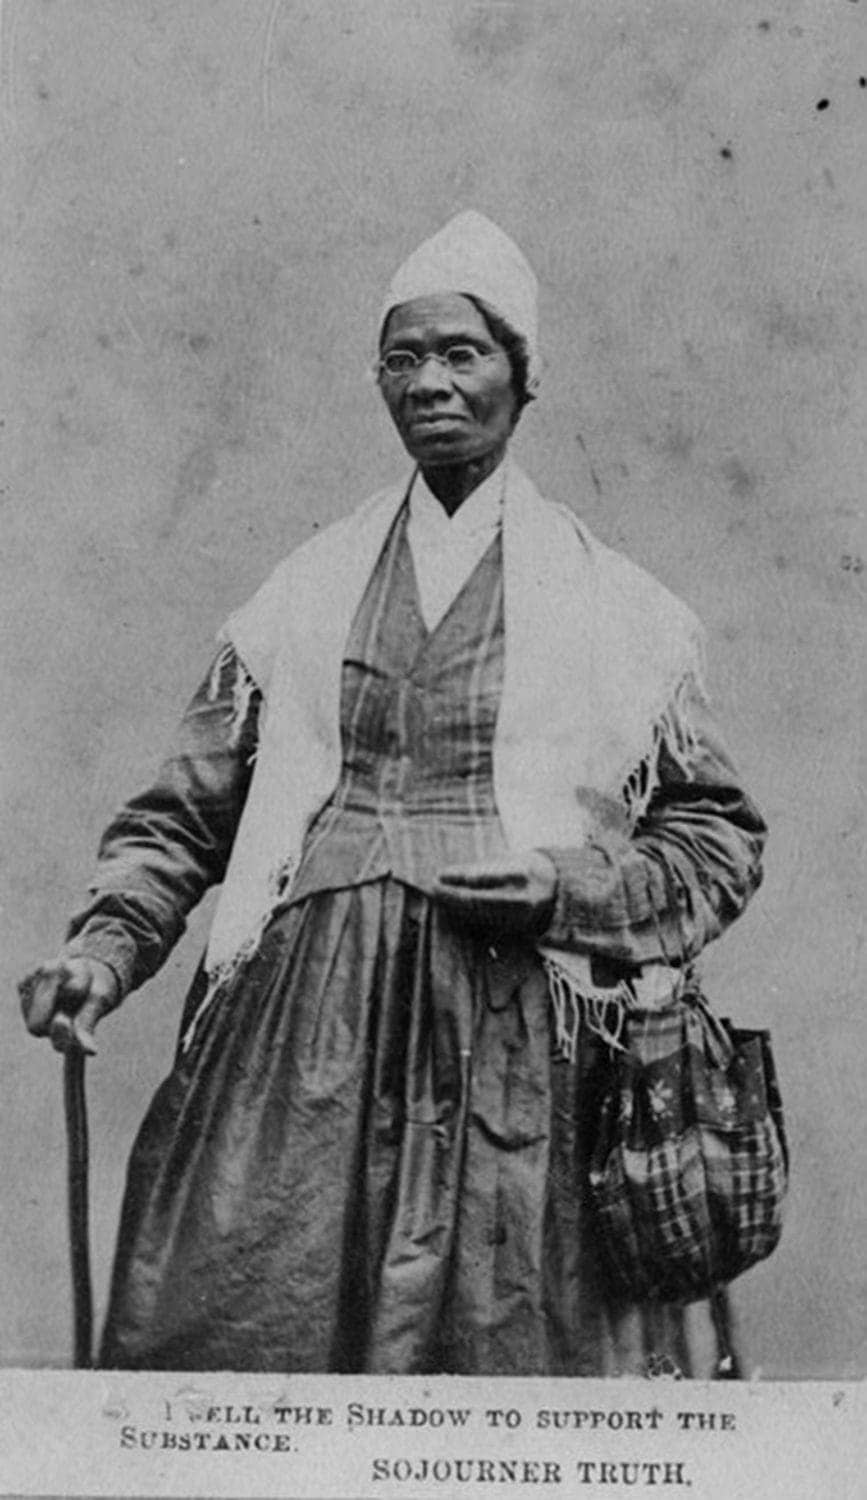 Sojourner-Truth, Souljourning for Truth: Wanda’s Picks for June 2022, Culture Currents Featured Local News & Views News & Views 